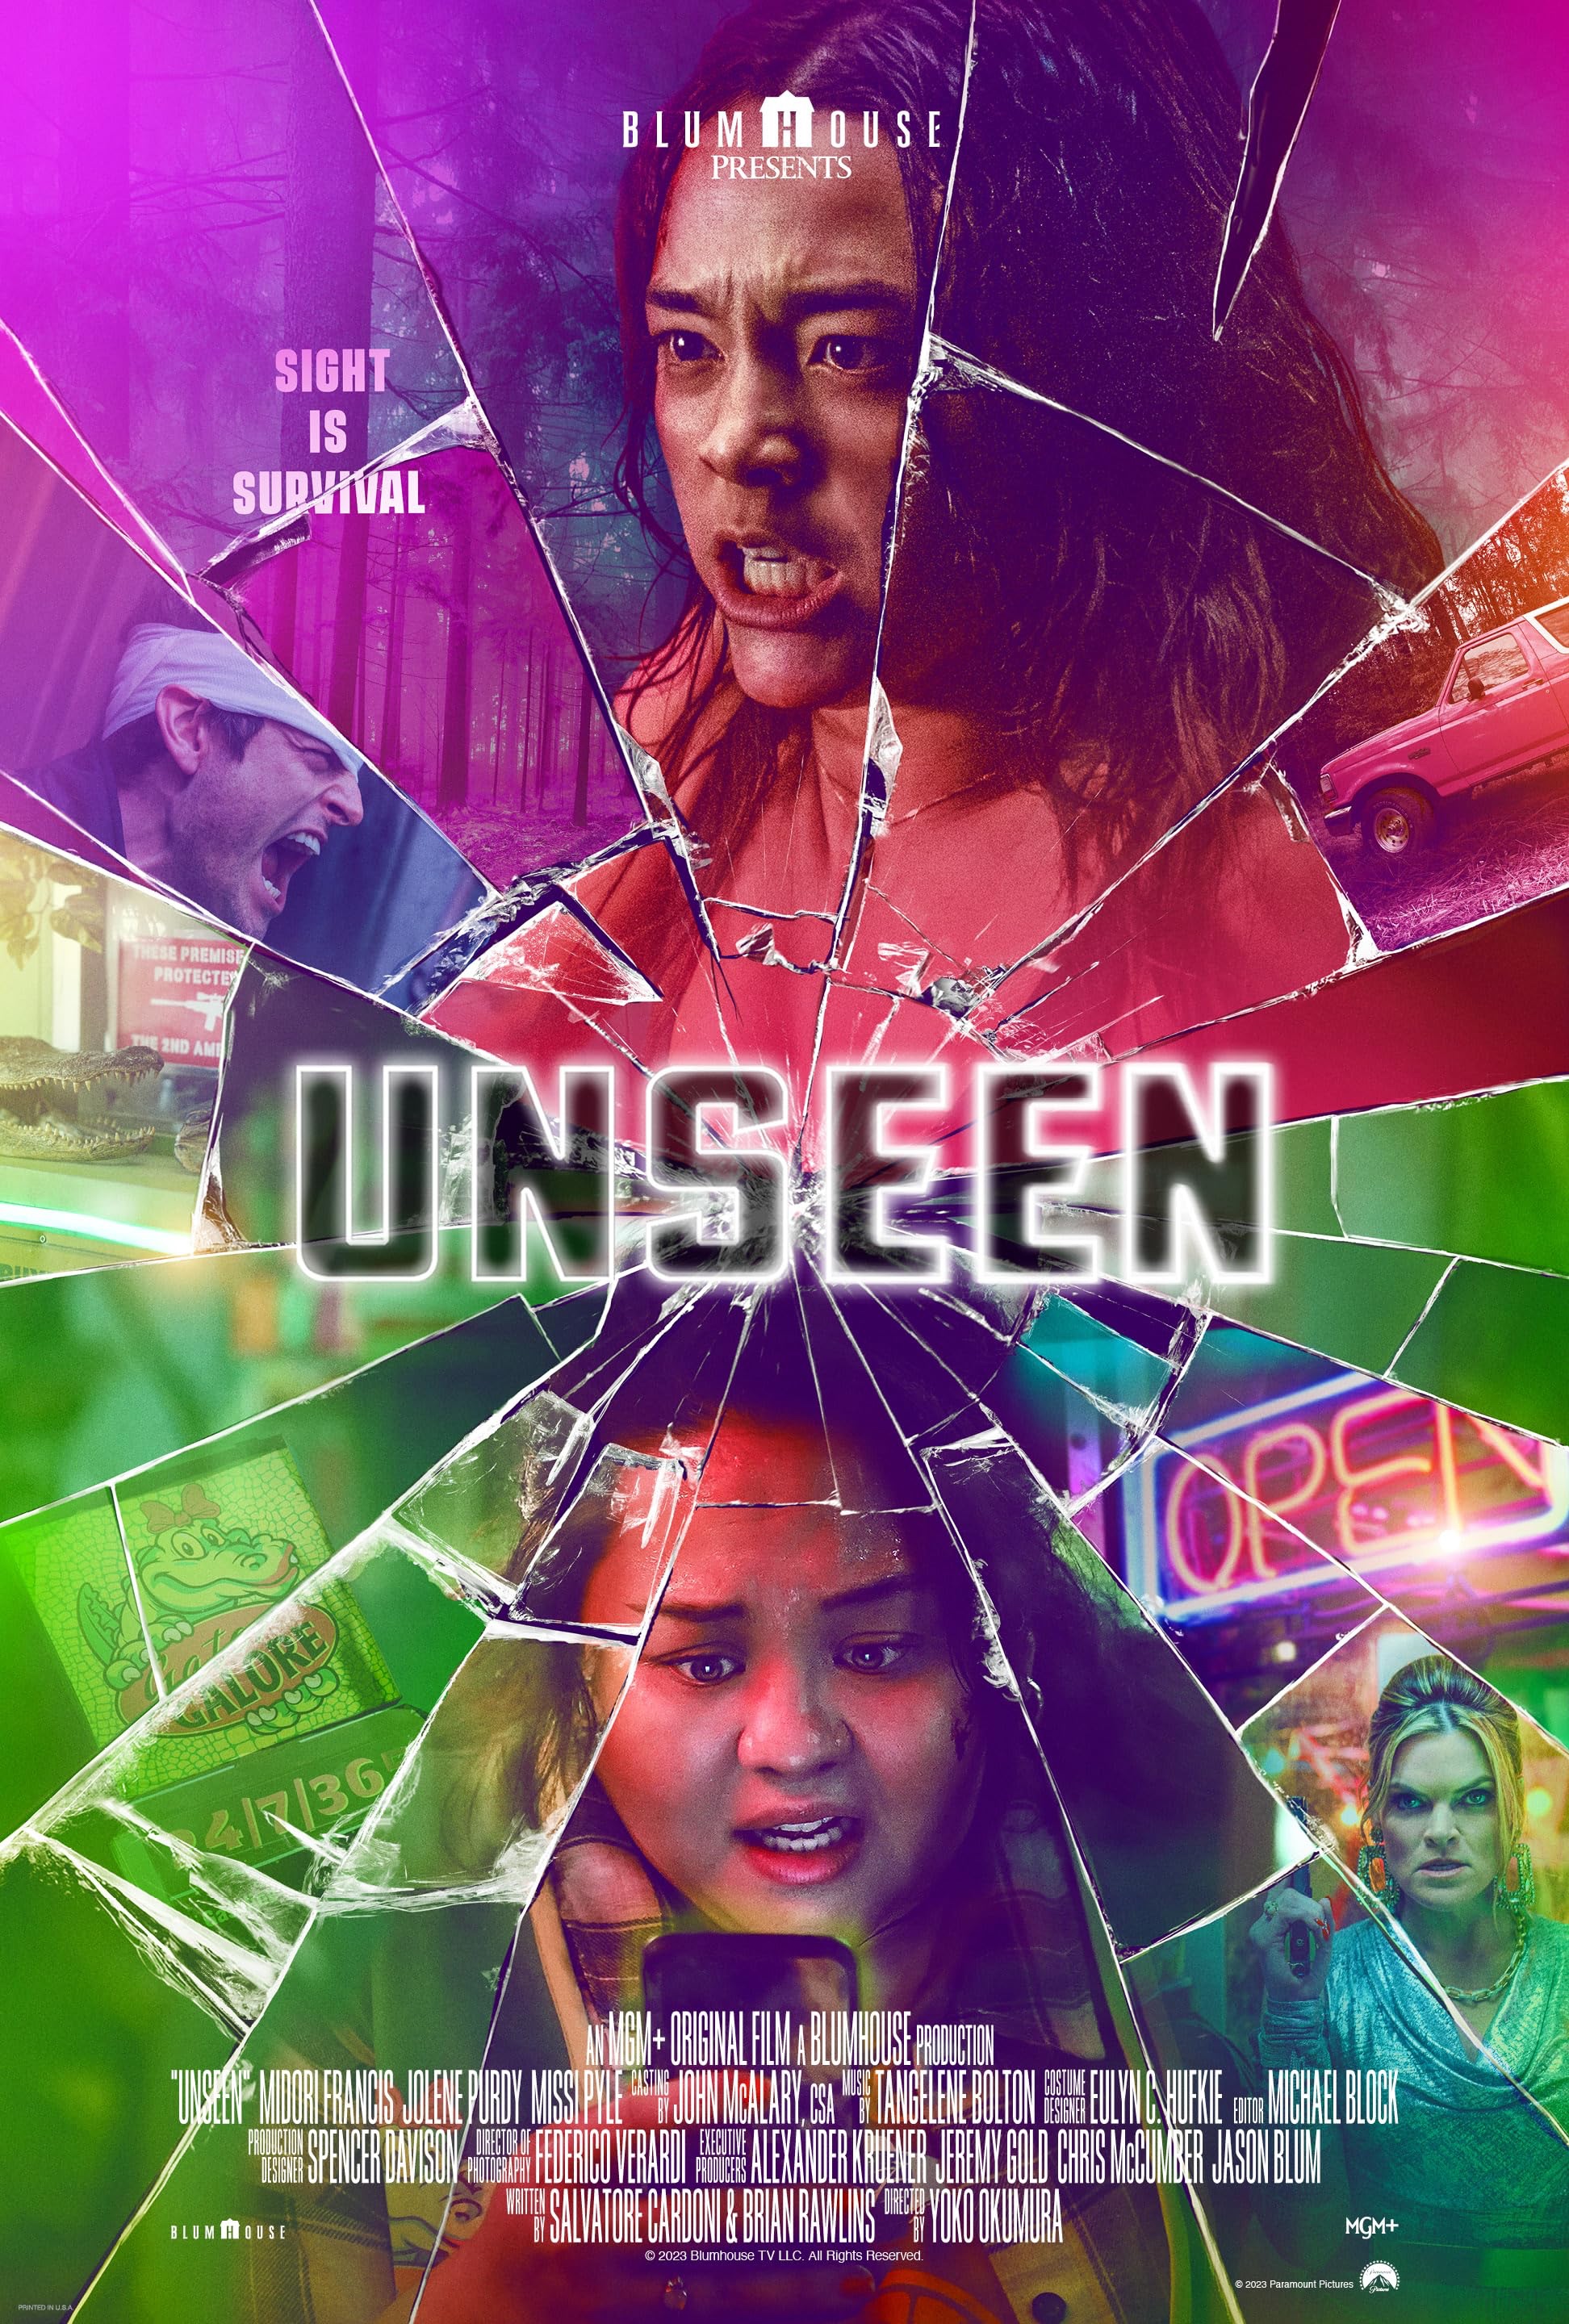 Unseen: A Phone Thriller With Long Distance Eyes